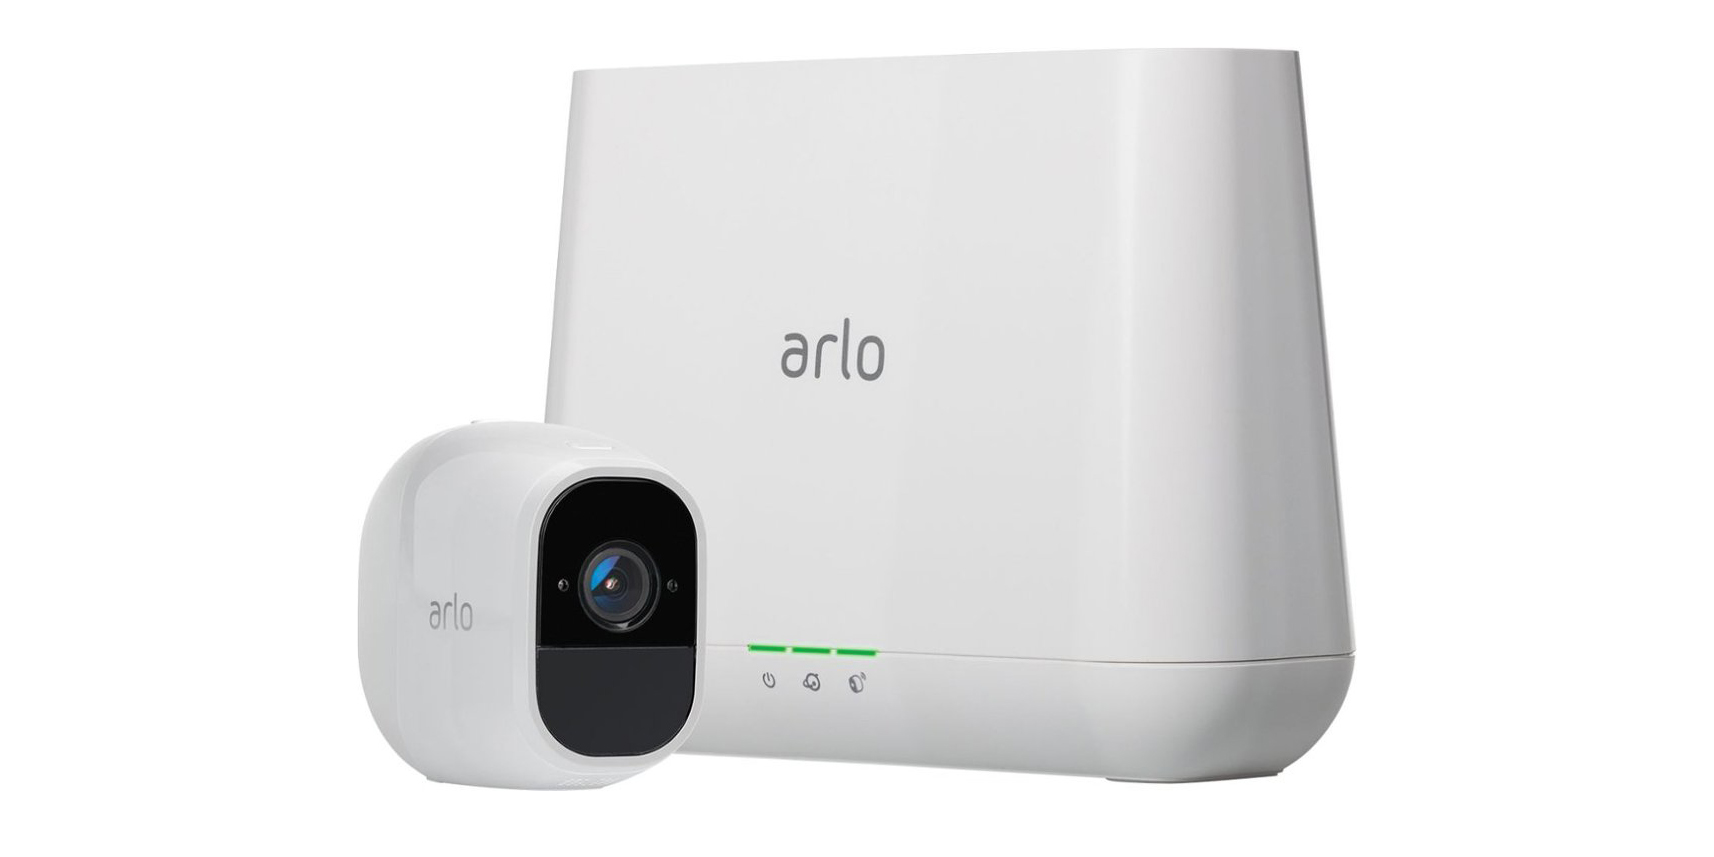 Add an Arlo Pro 2 Security System w/ FREE cloud storage to your home